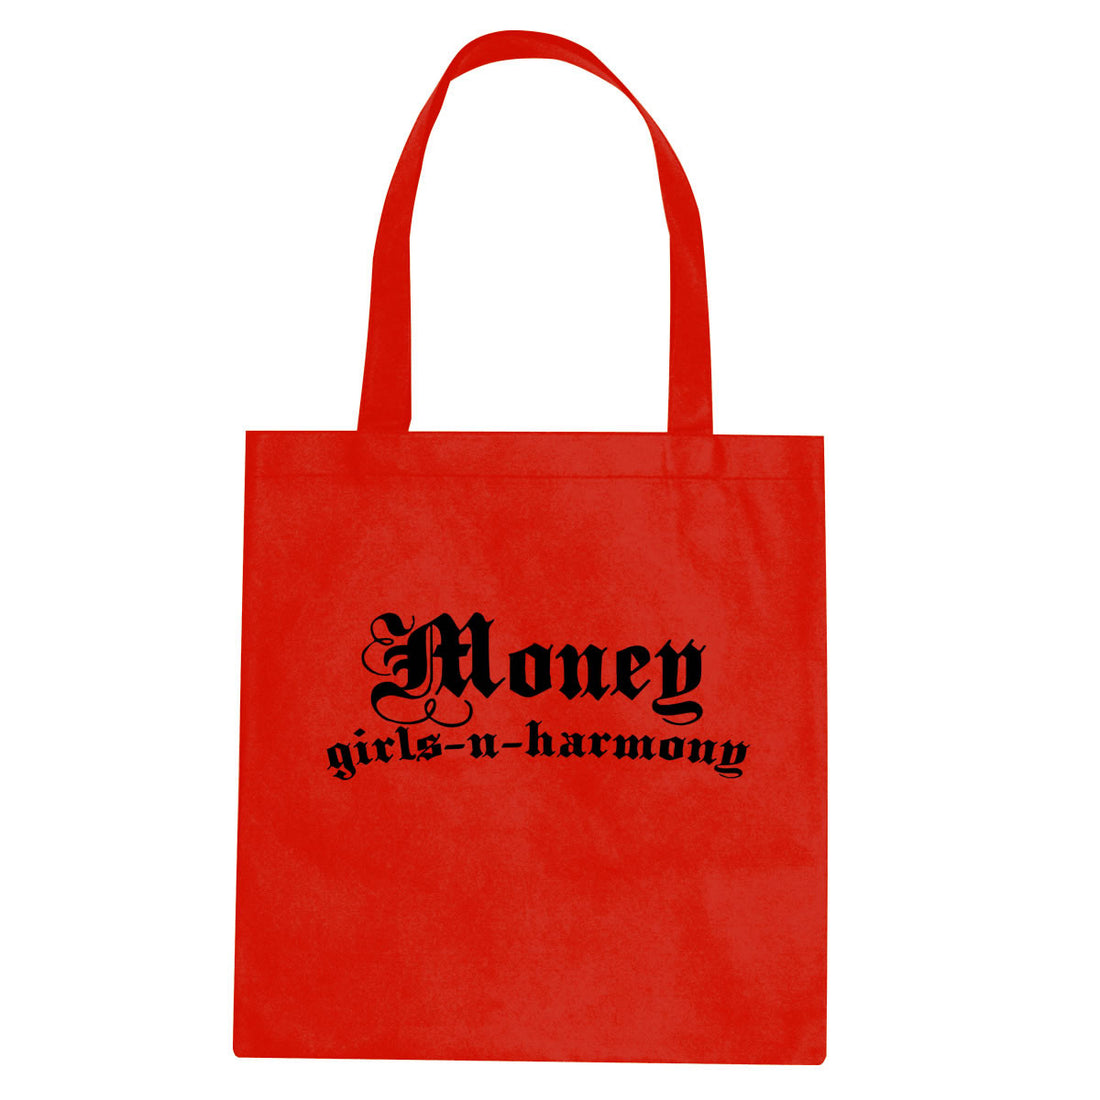 Money Girls And Harmony Tote Bag By Kings Of NY